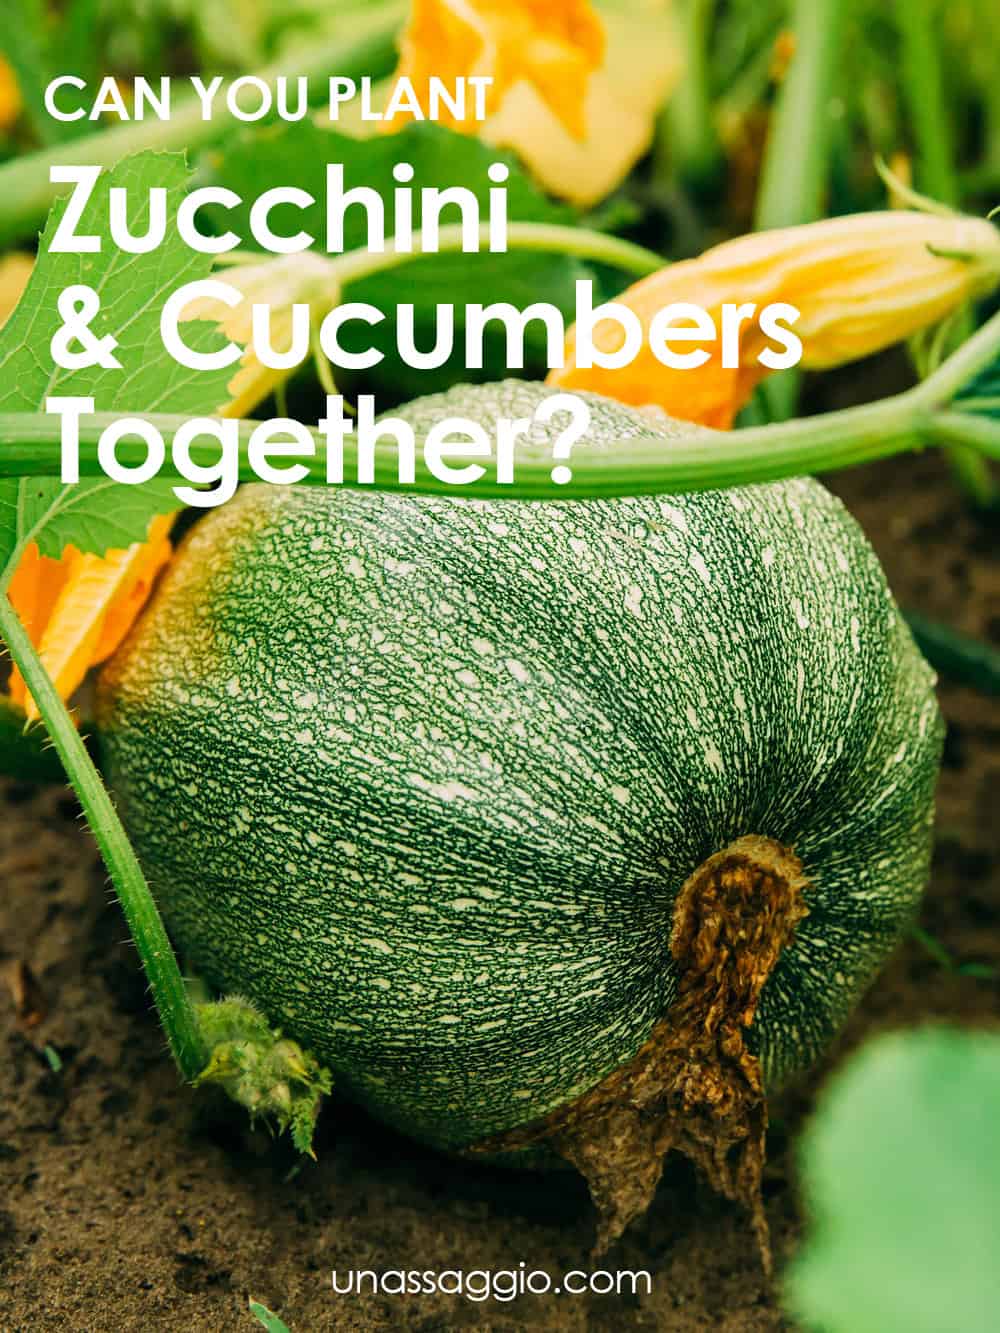 Can you plant zucchini and cucumbers together?